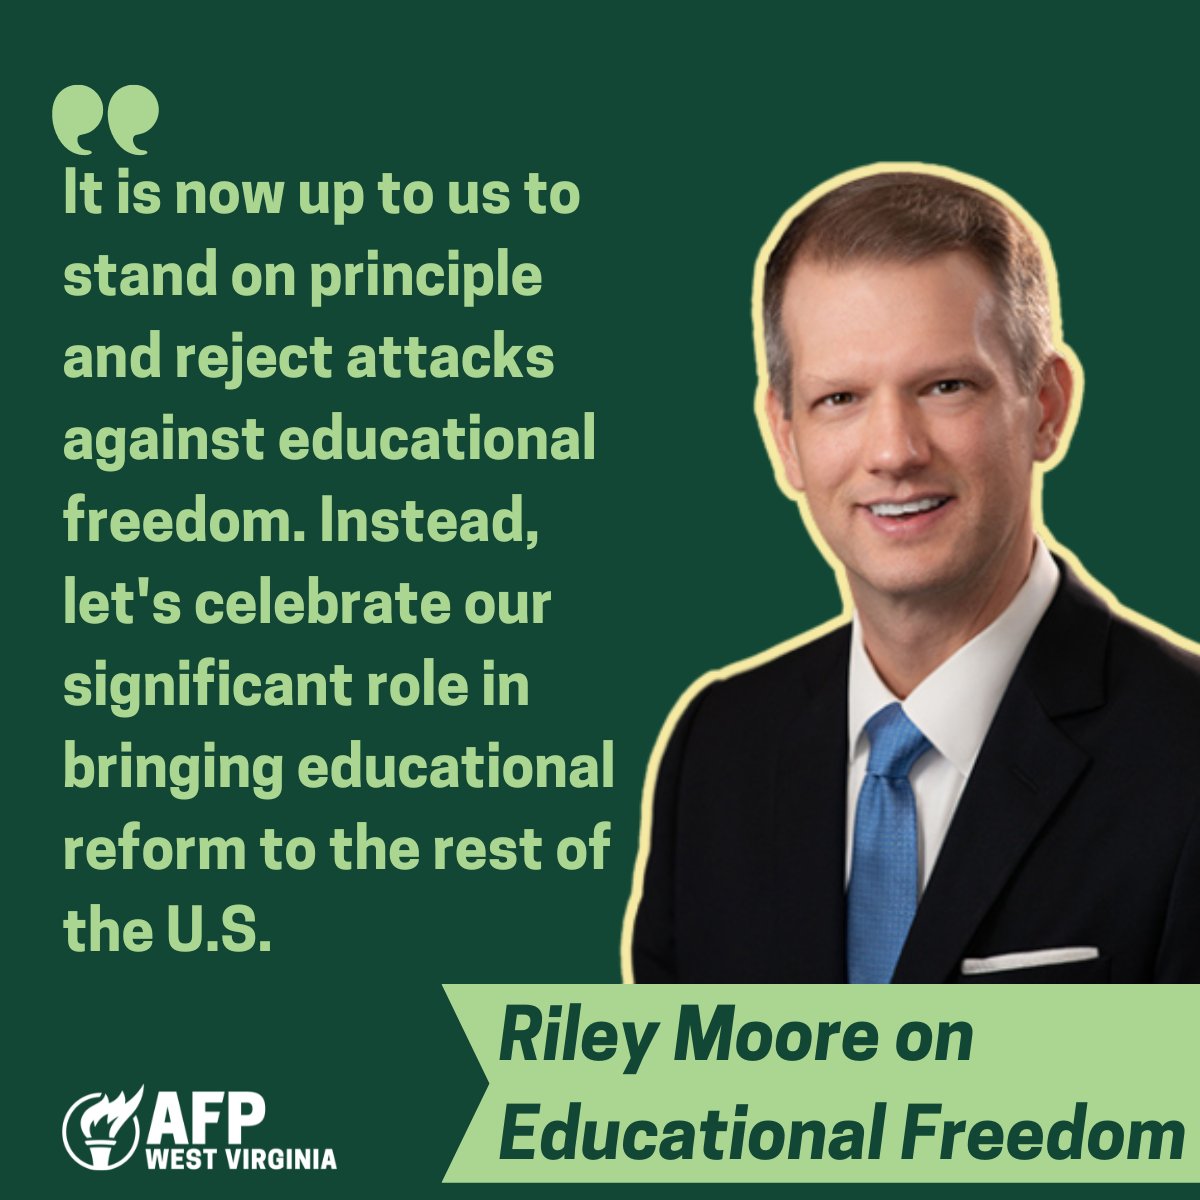 State Treasurer @RileyMooreWV says the fight for educational freedom is NOT done!